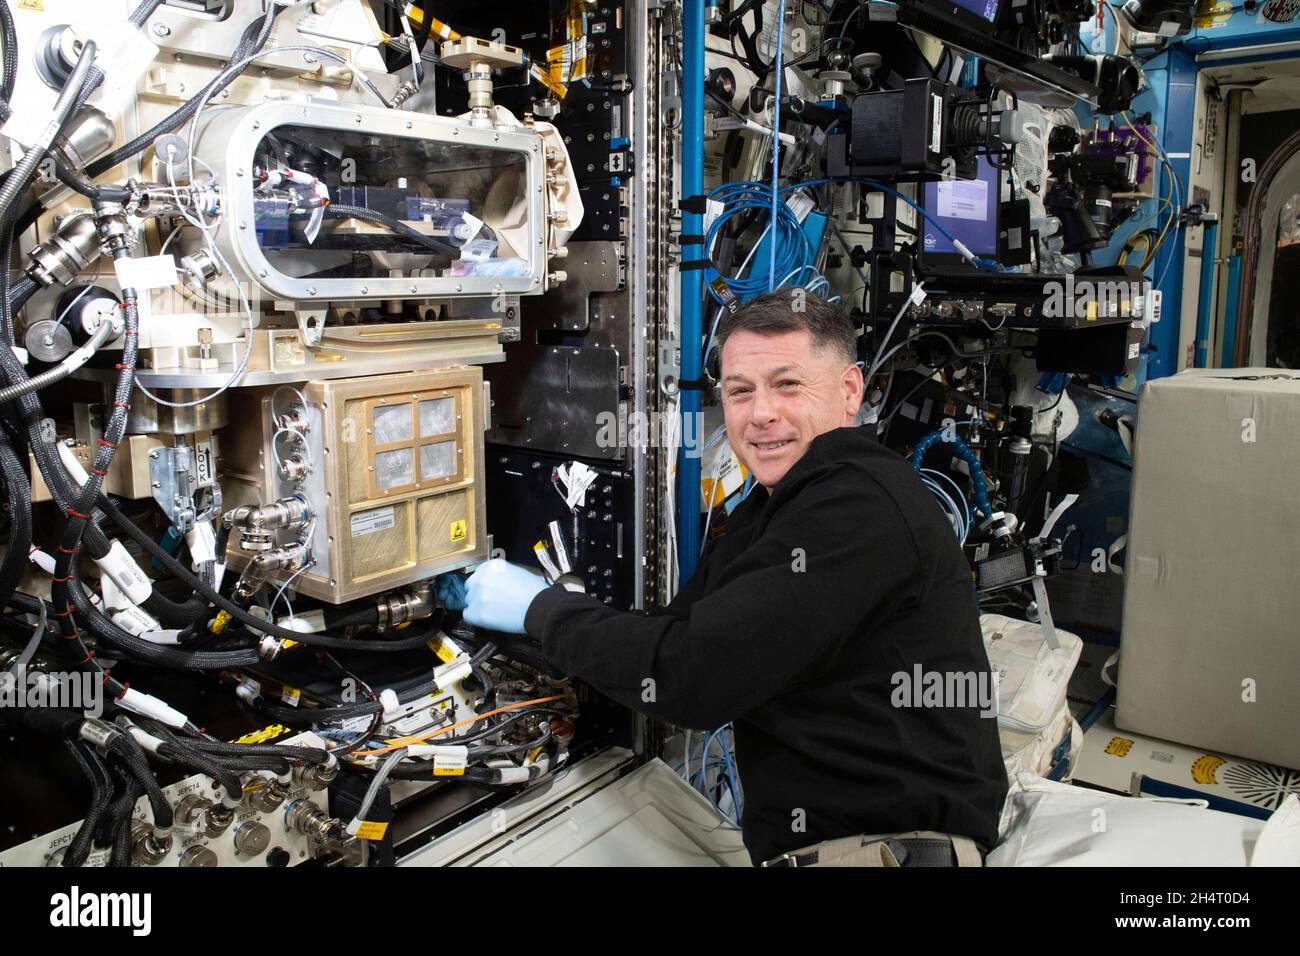 NASA astronaut and Expedition 65 Flight Engineer Shane Kimbrough installs and configures a new Advanced Colloids Experiment module inside the U.S. Destiny laboratory module's Fluids Integrated Rack (FIR). The work supports the ACE-T9 fluid physics study that uses the FIR's Light Microscopy Module to image colloidal molecules for insights into the development of advanced materials not possible to produce in Earth's gravity on August 17, 2021. Credit: NASA via CNP Stock Photo